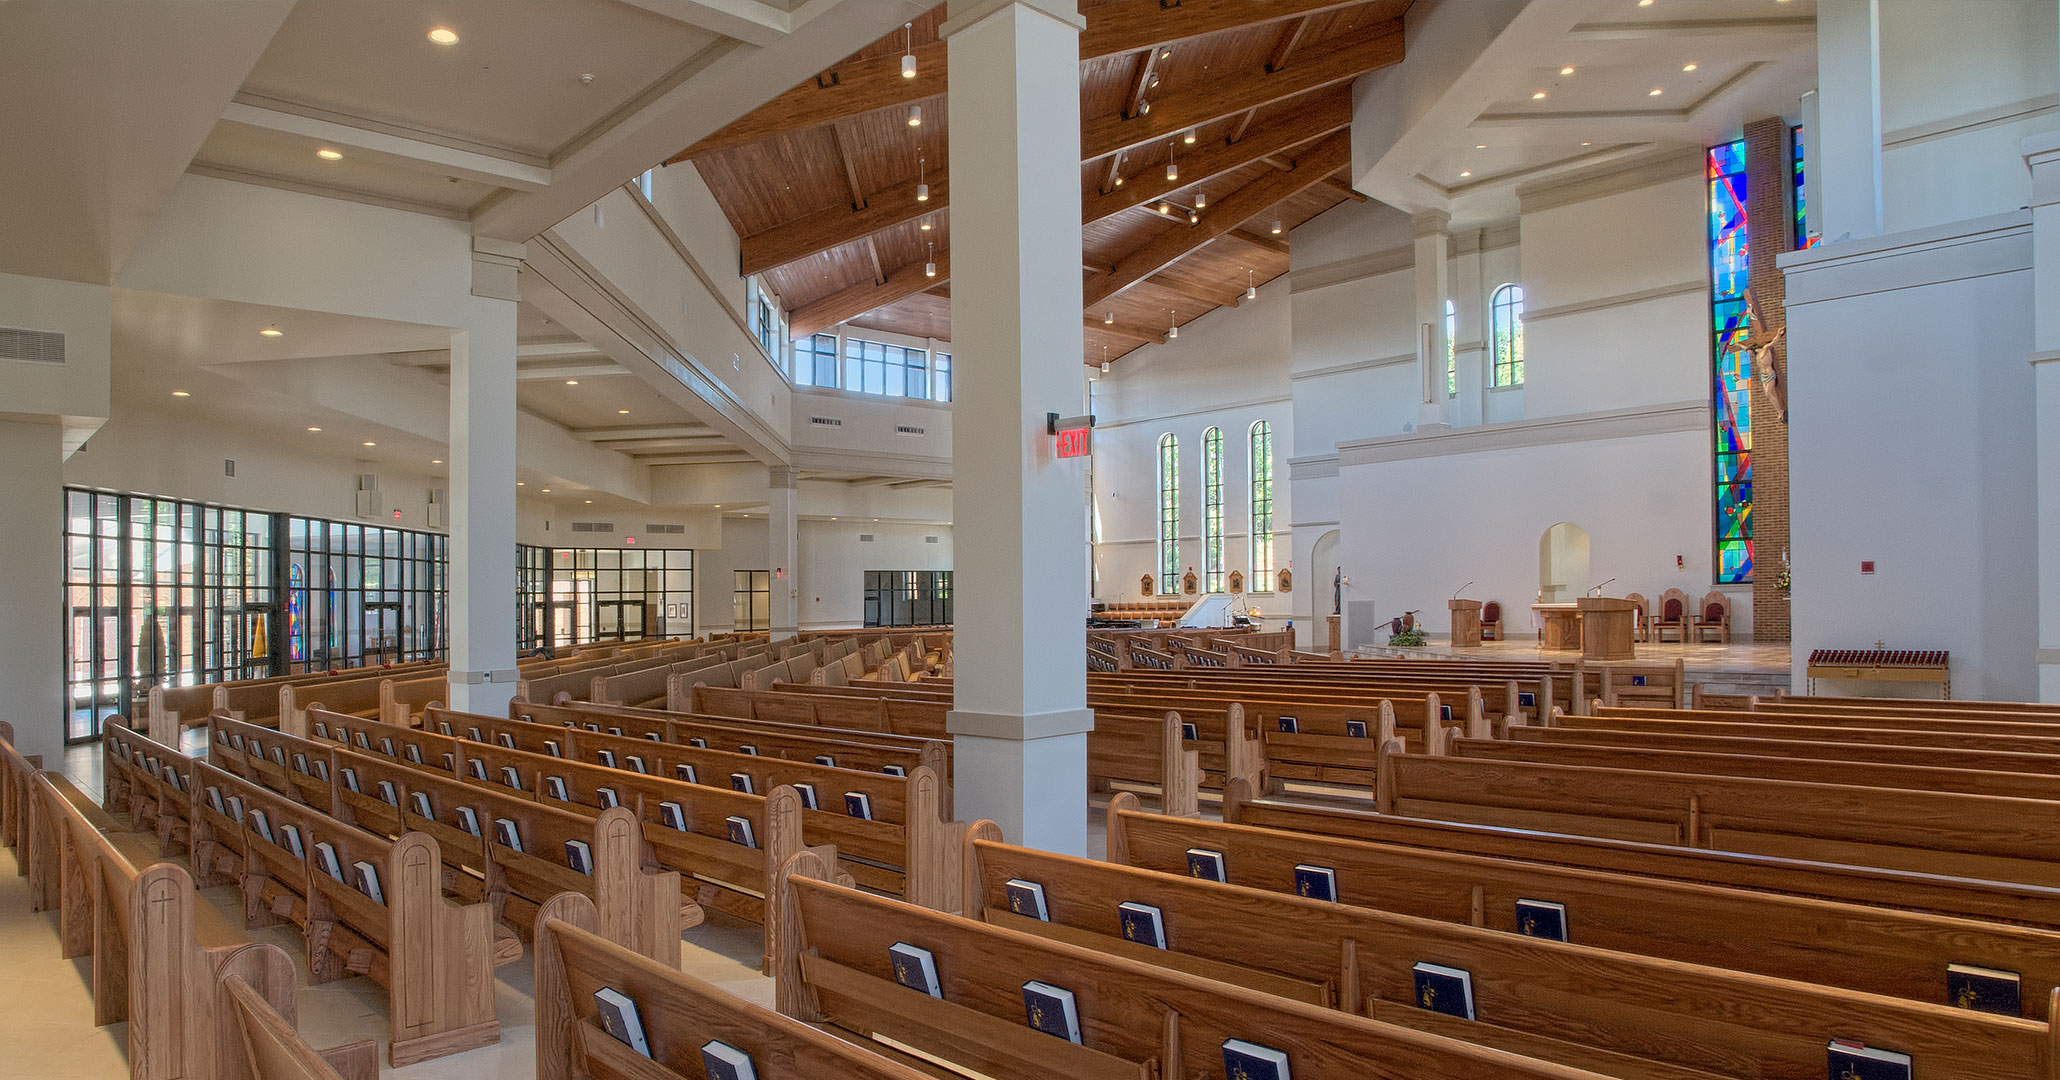 Boudreaux is experienced in designing the interiors of Catholic churches.